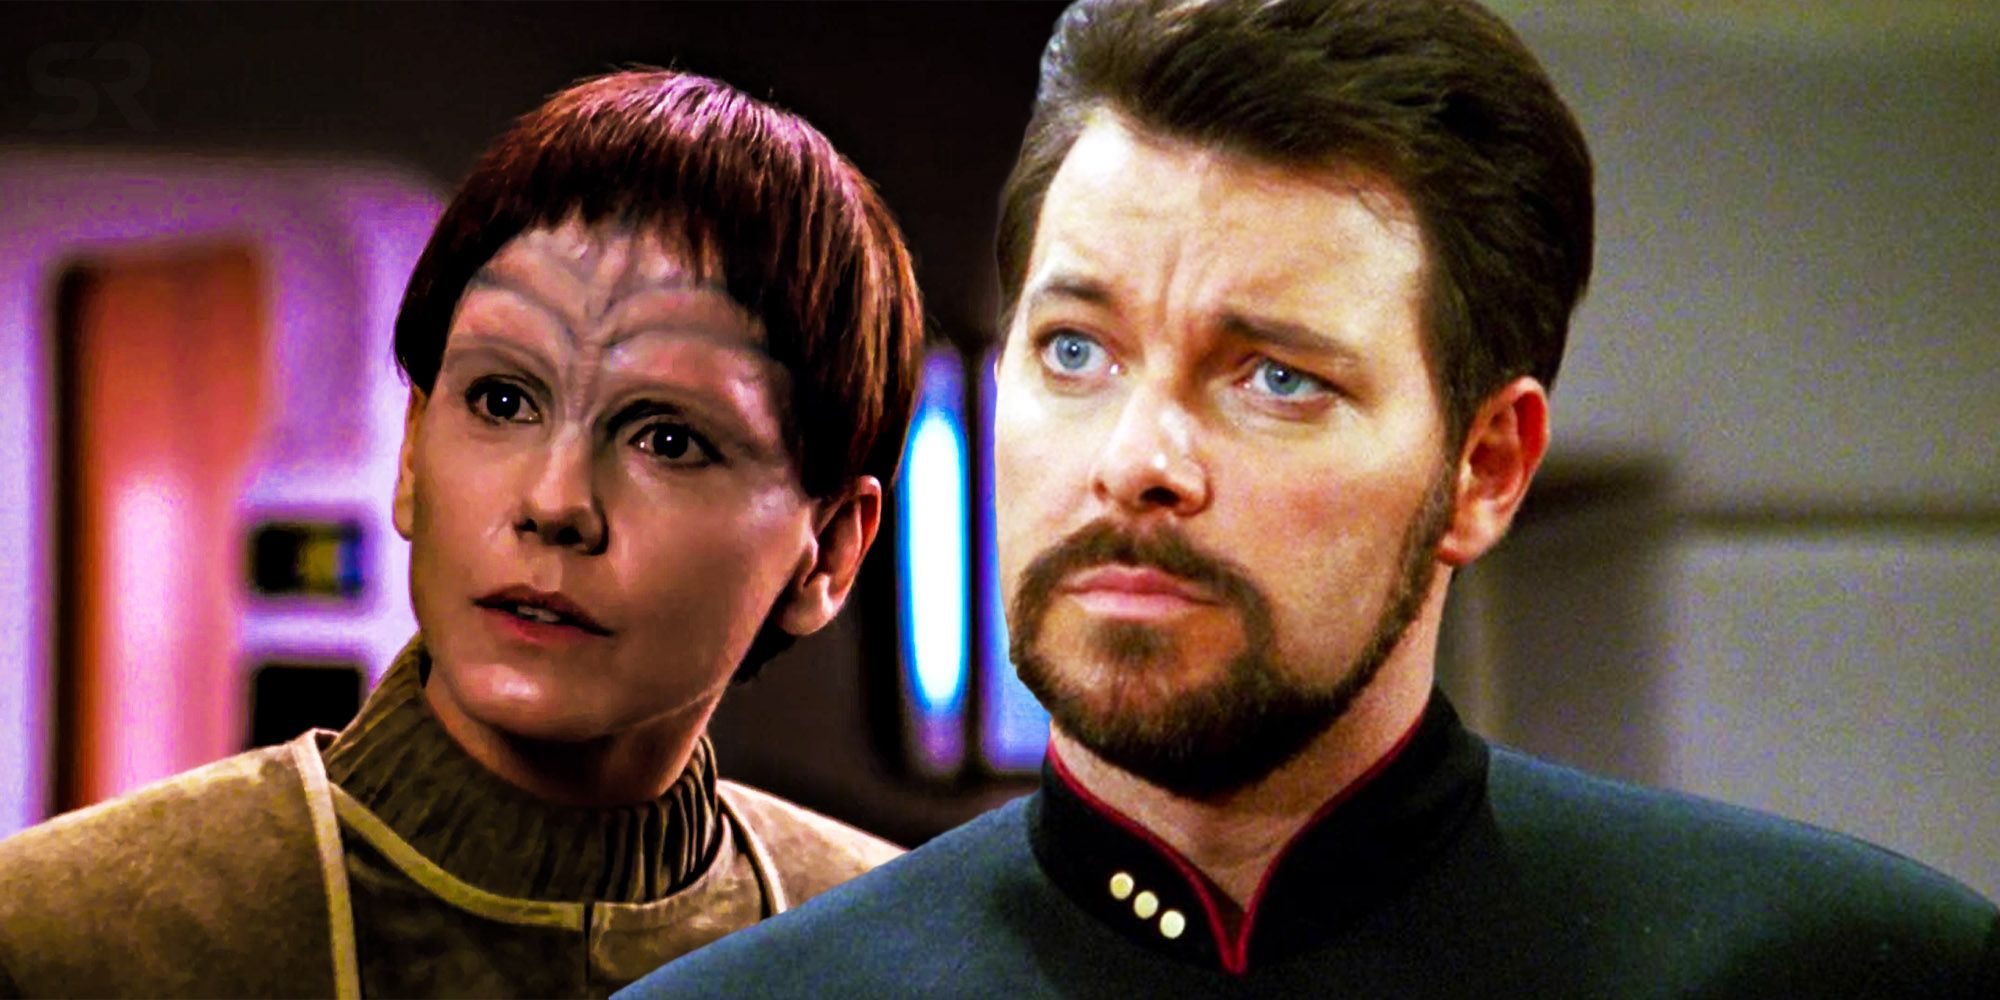 Jonathan Frakes Was Right About star trek the next generations Most LGBTQ Episode